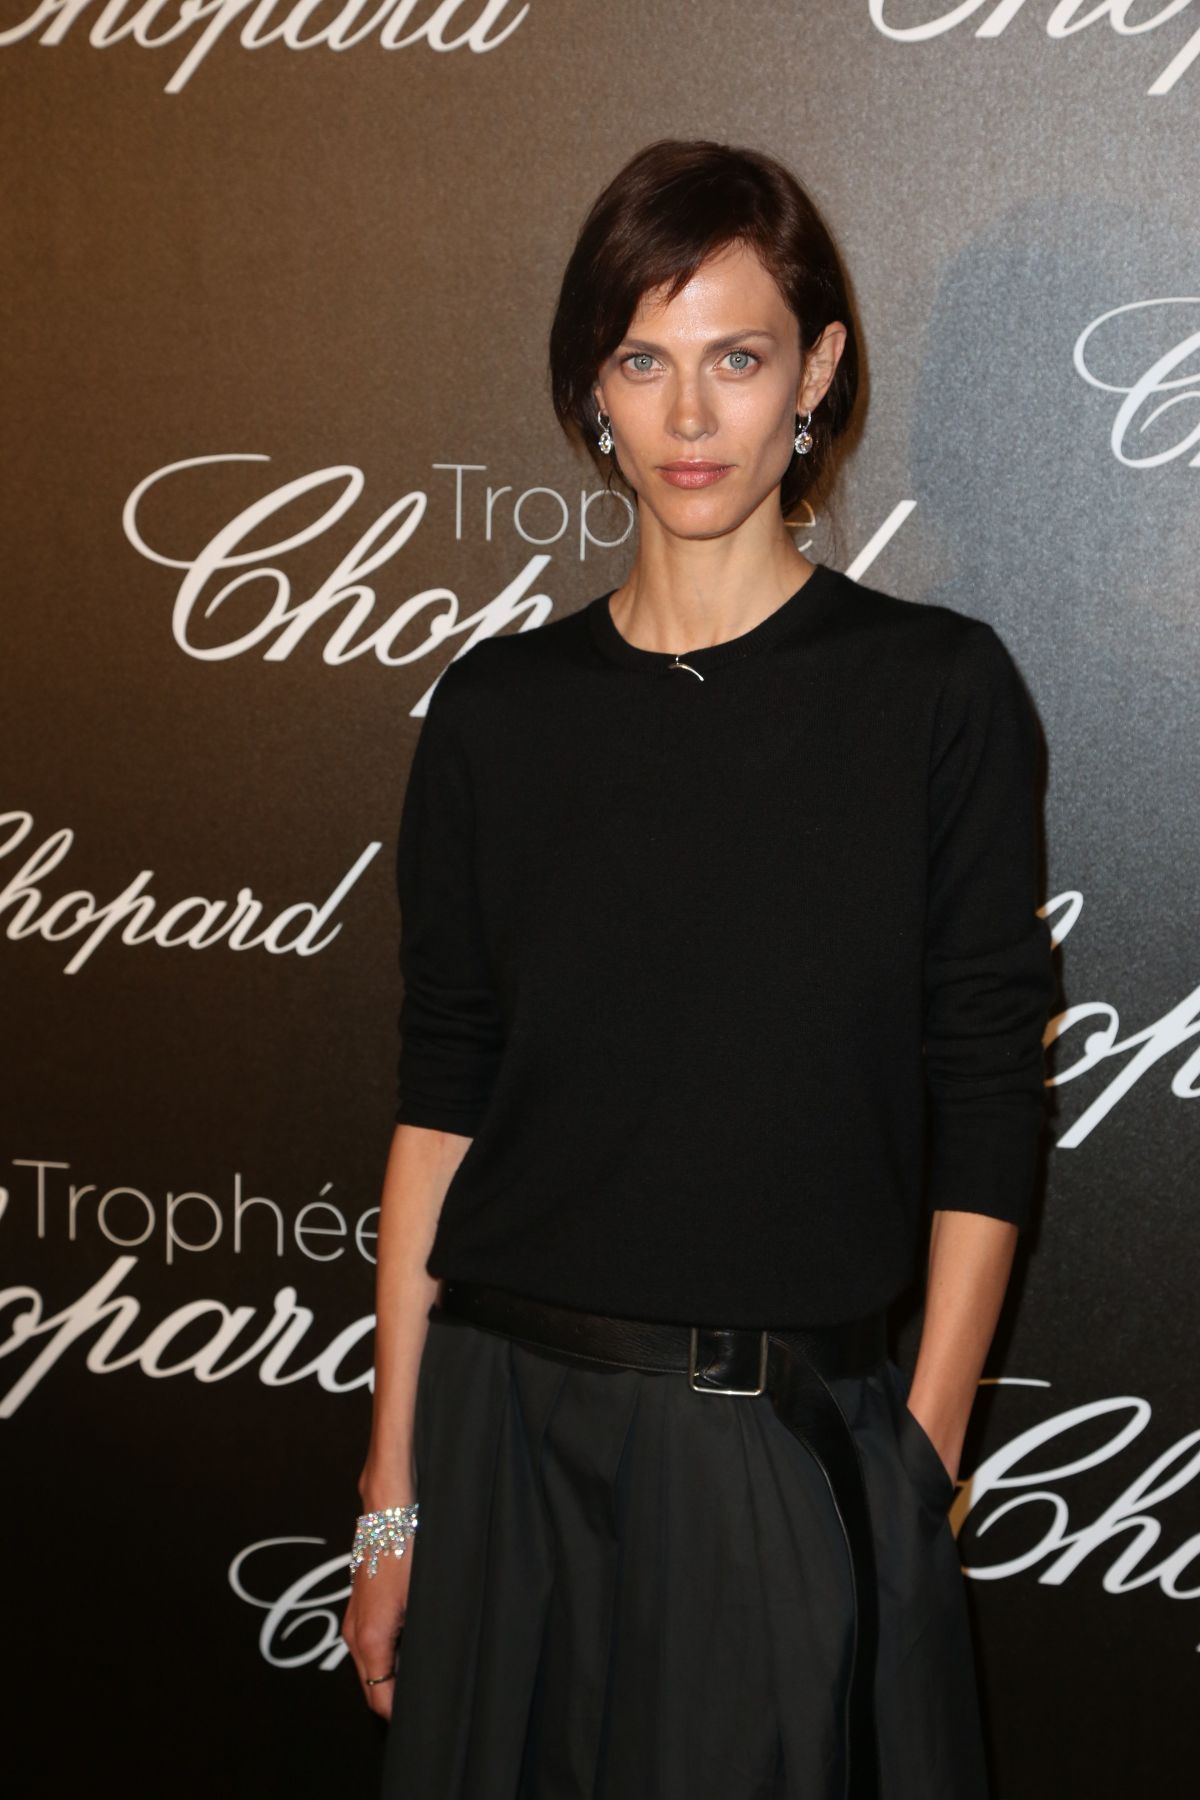 AYMELINE VALADE at Chopard Trophy Event in Cannes 05/22/2017